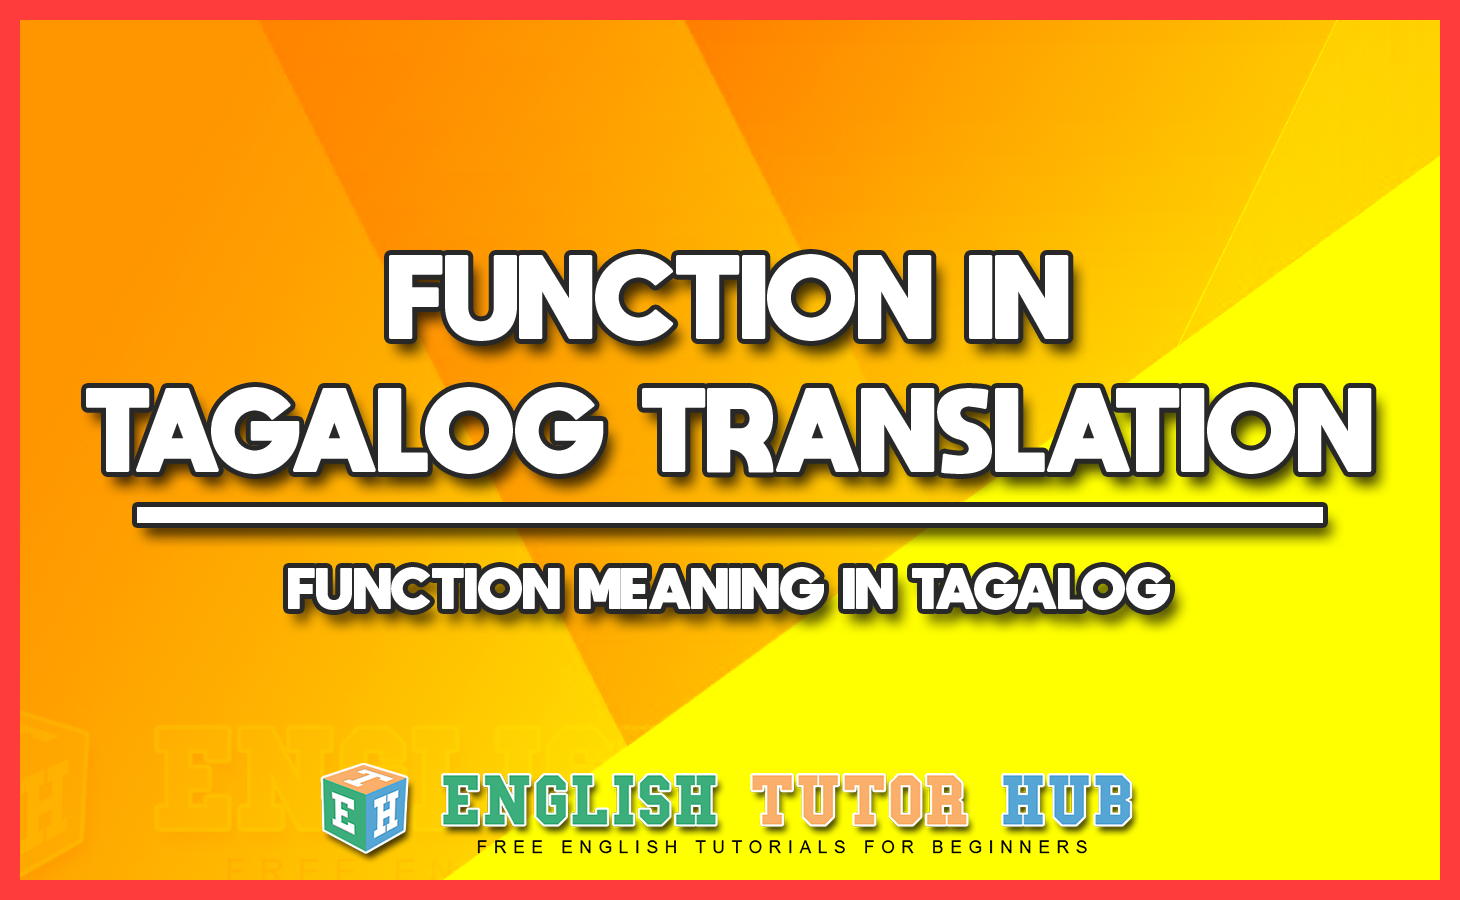 FUNCTION IN TAGALOG TRANSLATION - FUNCTION MEANING IN TAGALOG